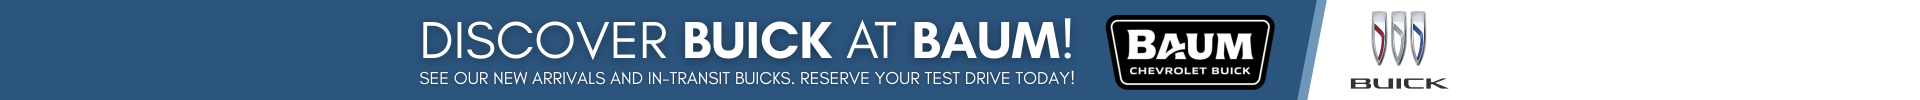 Discover Buick at Baum